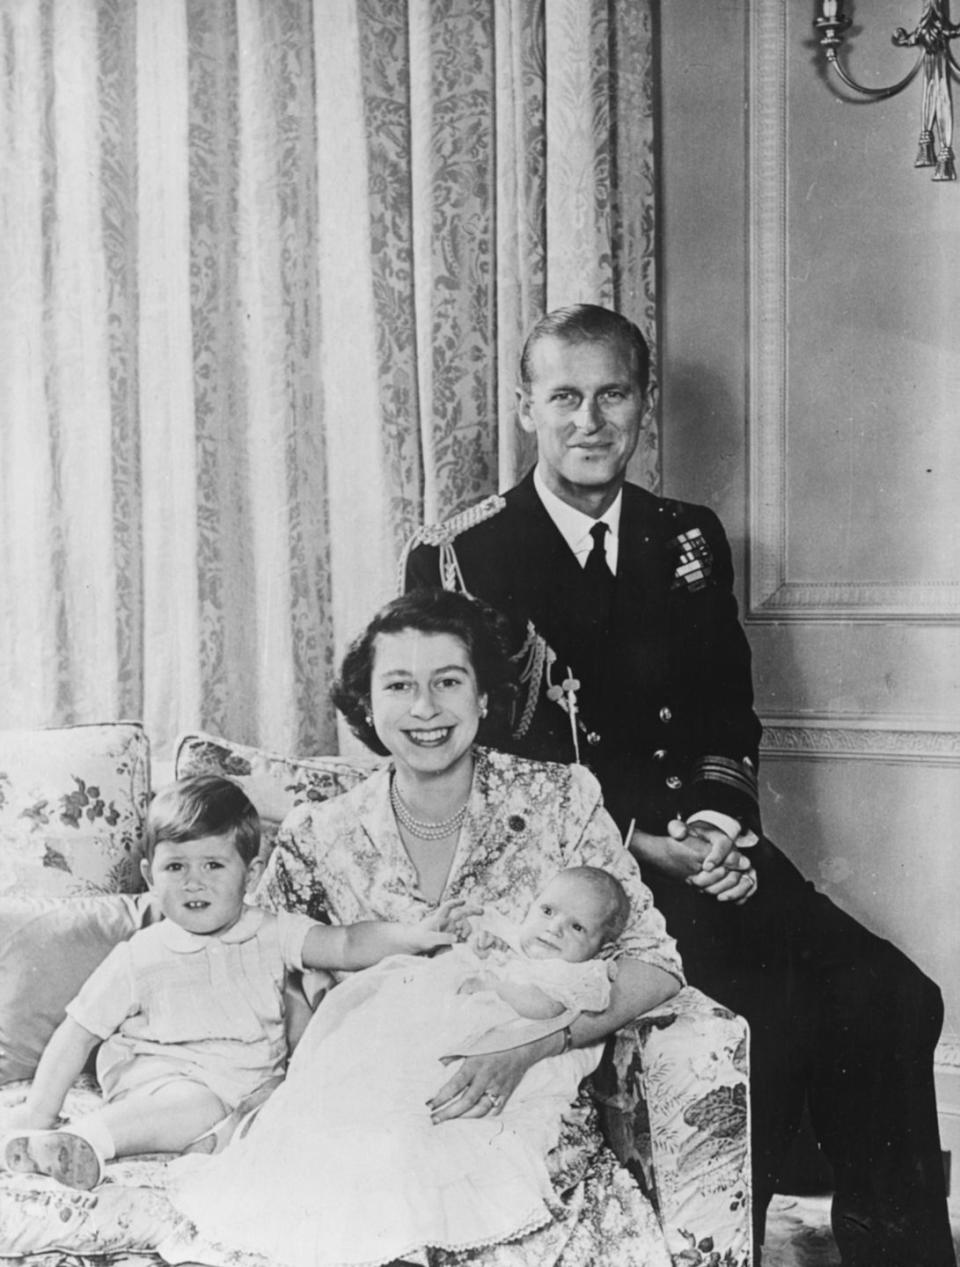 <p>Princess Anne, 2 months, poses for a photo with her brother, Prince Charles, 23 months, and their parents, Princess Elizabeth and Prince Philip, at Buckingham Palace. Elizabeth would become queen just two years later.</p>